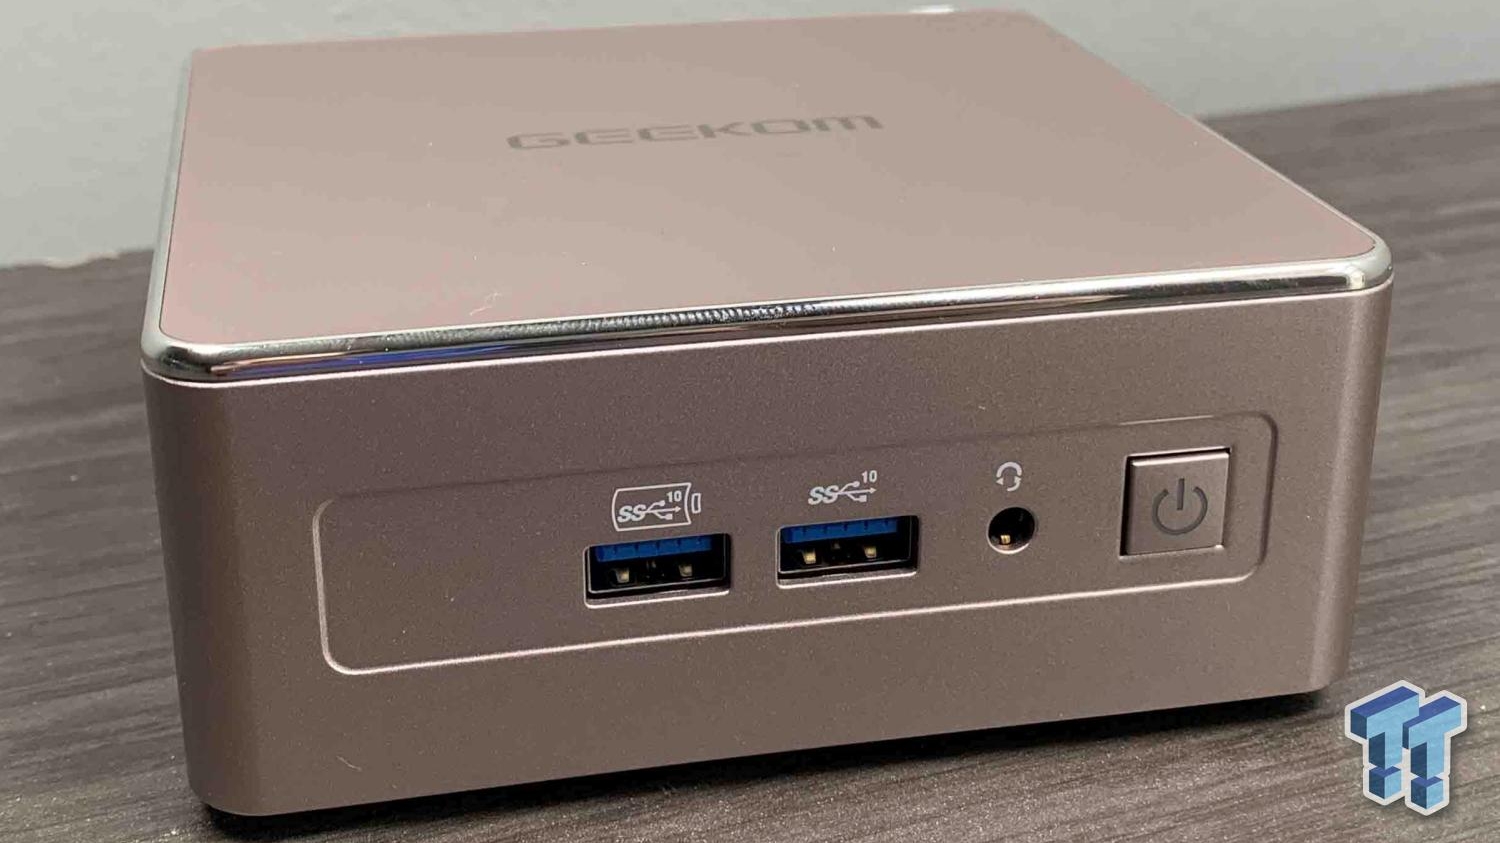 GEEKOM A5 mini PC review - a great mini PC for most people - The